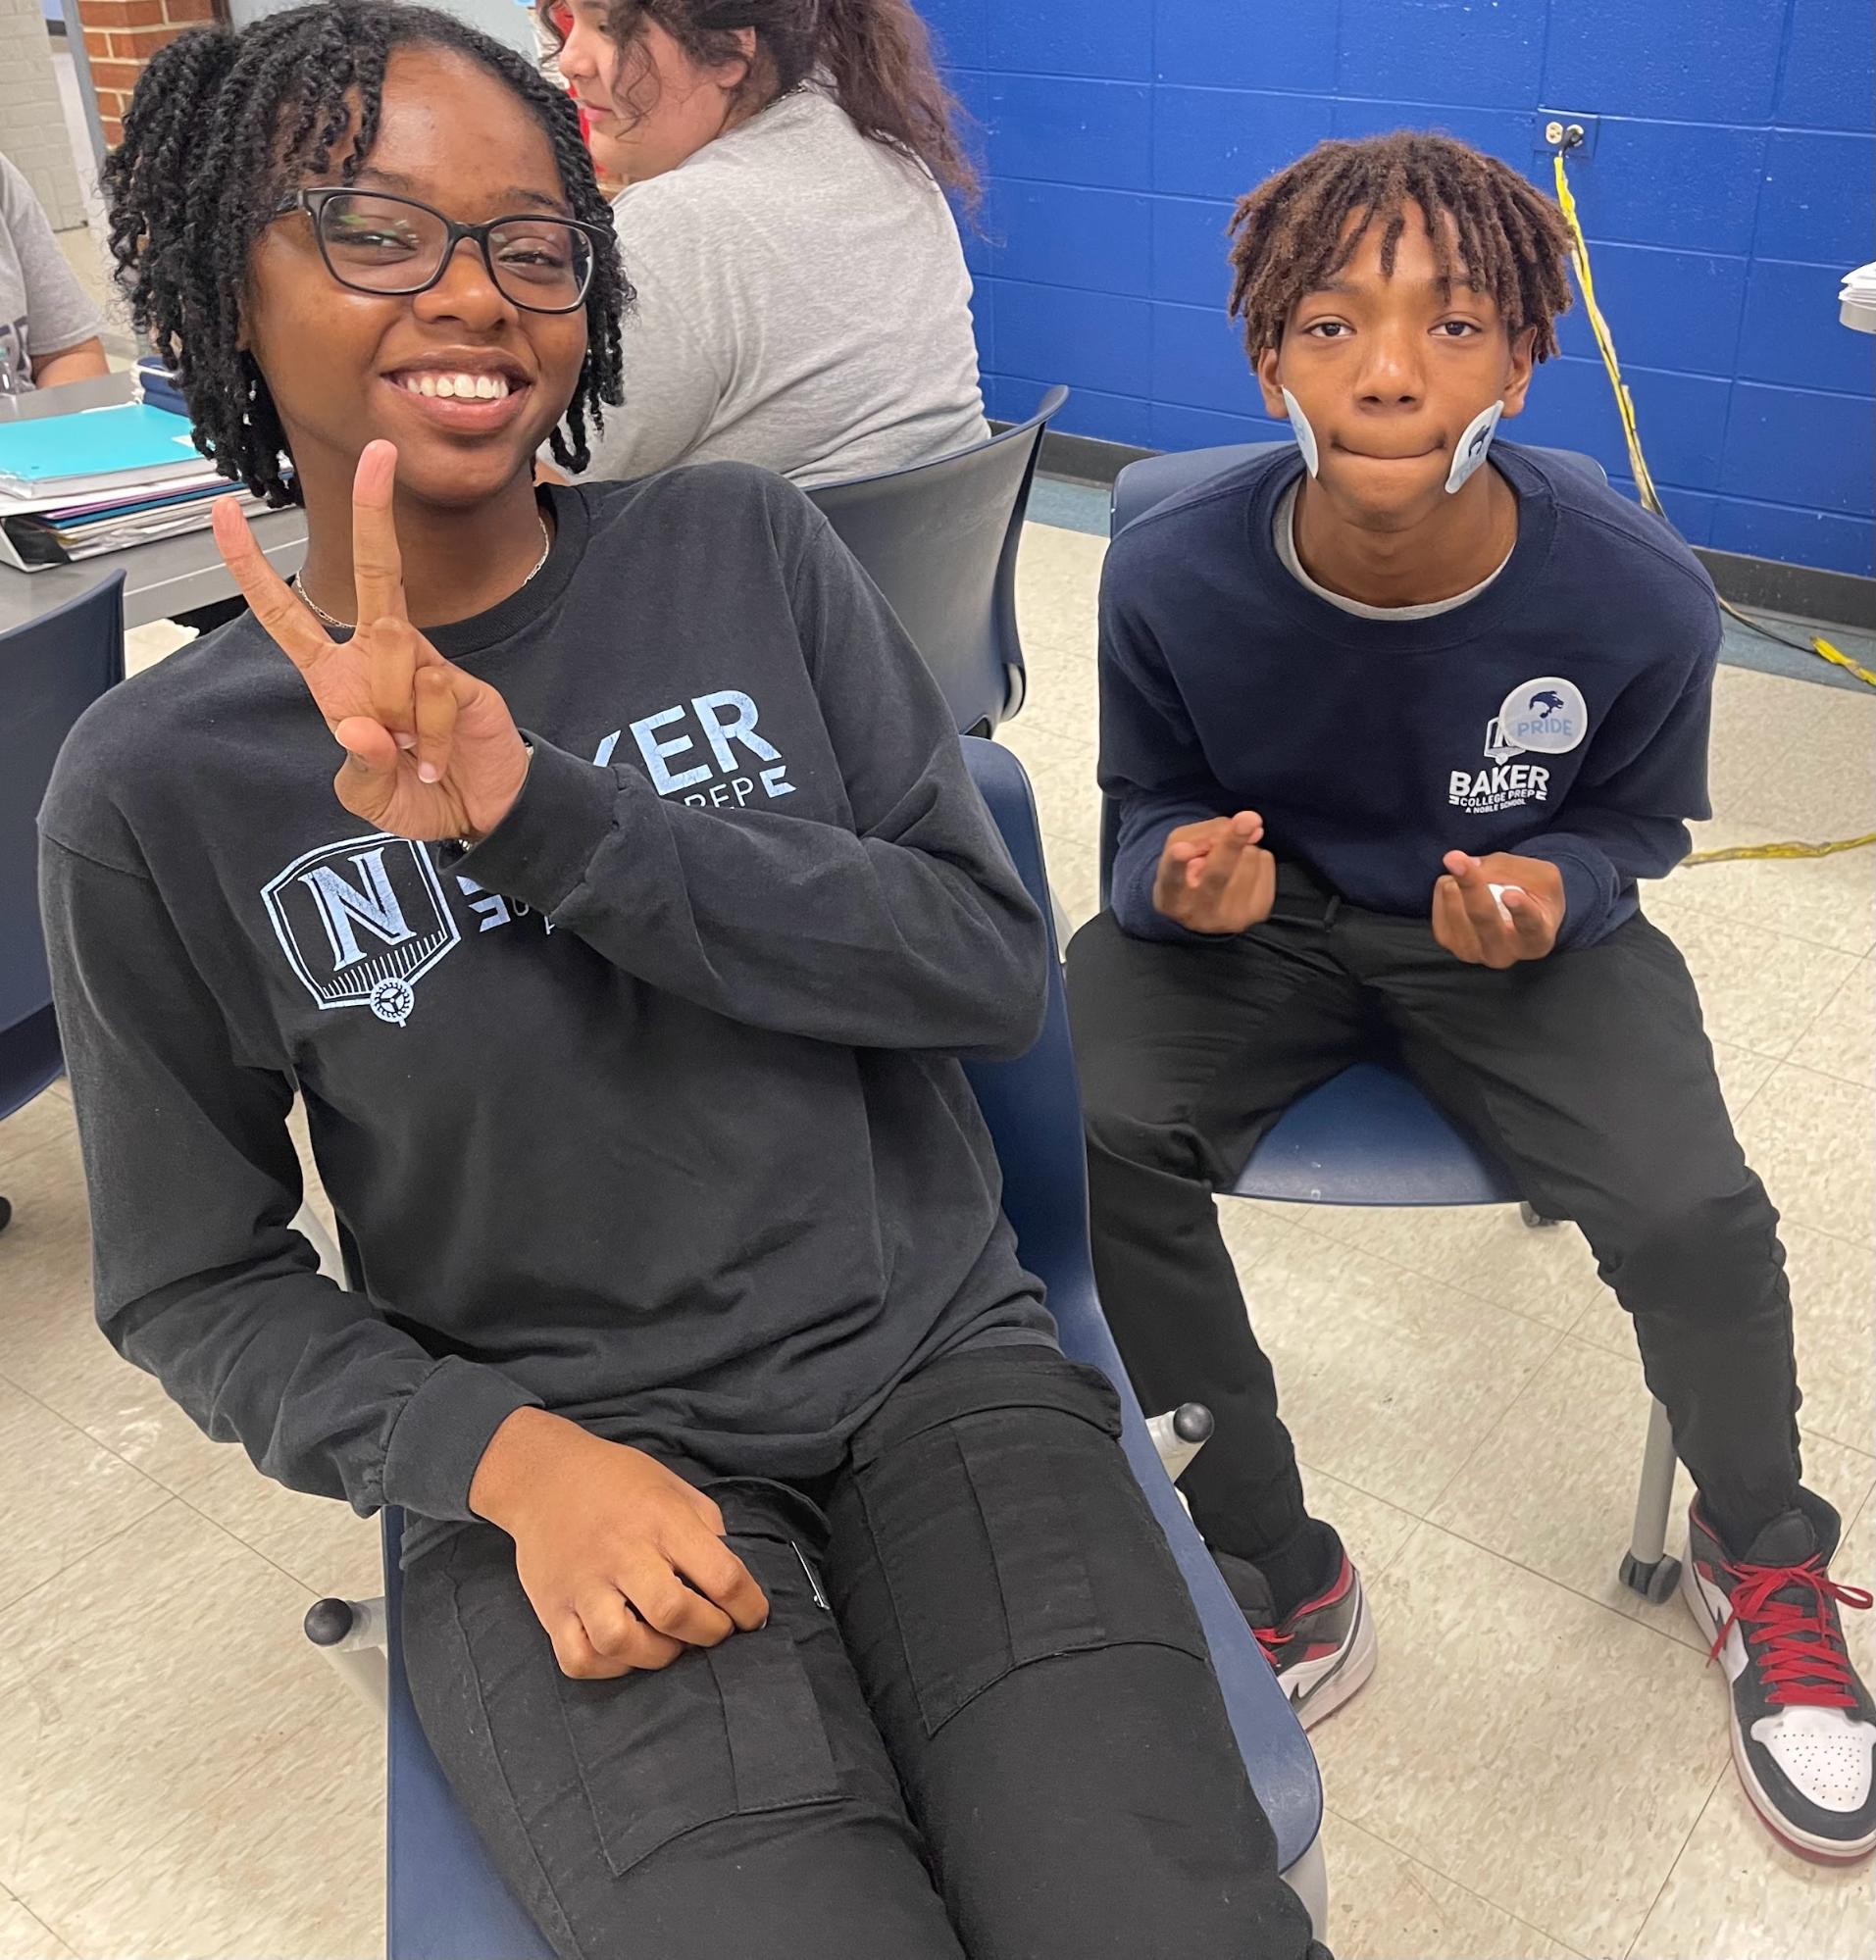 In this photo, Lion's Pride mentor and Baker College Prep junior Tykaha is sitting next to her mentee Tony. They are smiling and posing with peace signs for the camera.